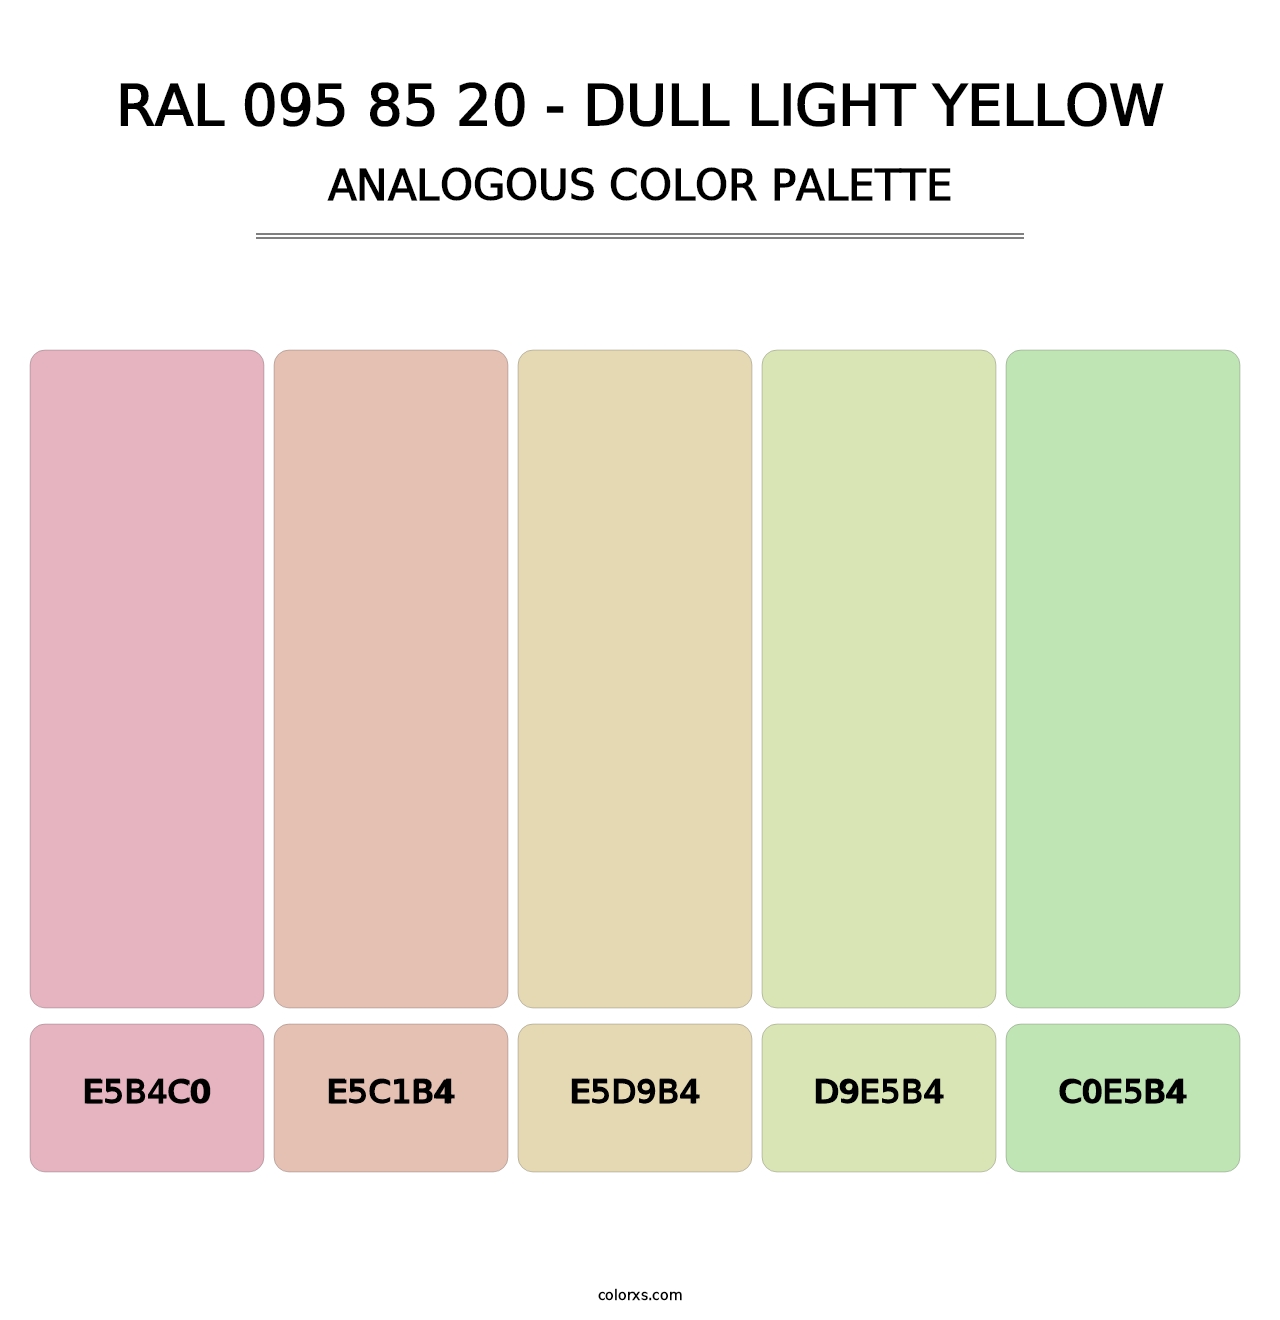 RAL 095 85 20 - Dull Light Yellow - Analogous Color Palette